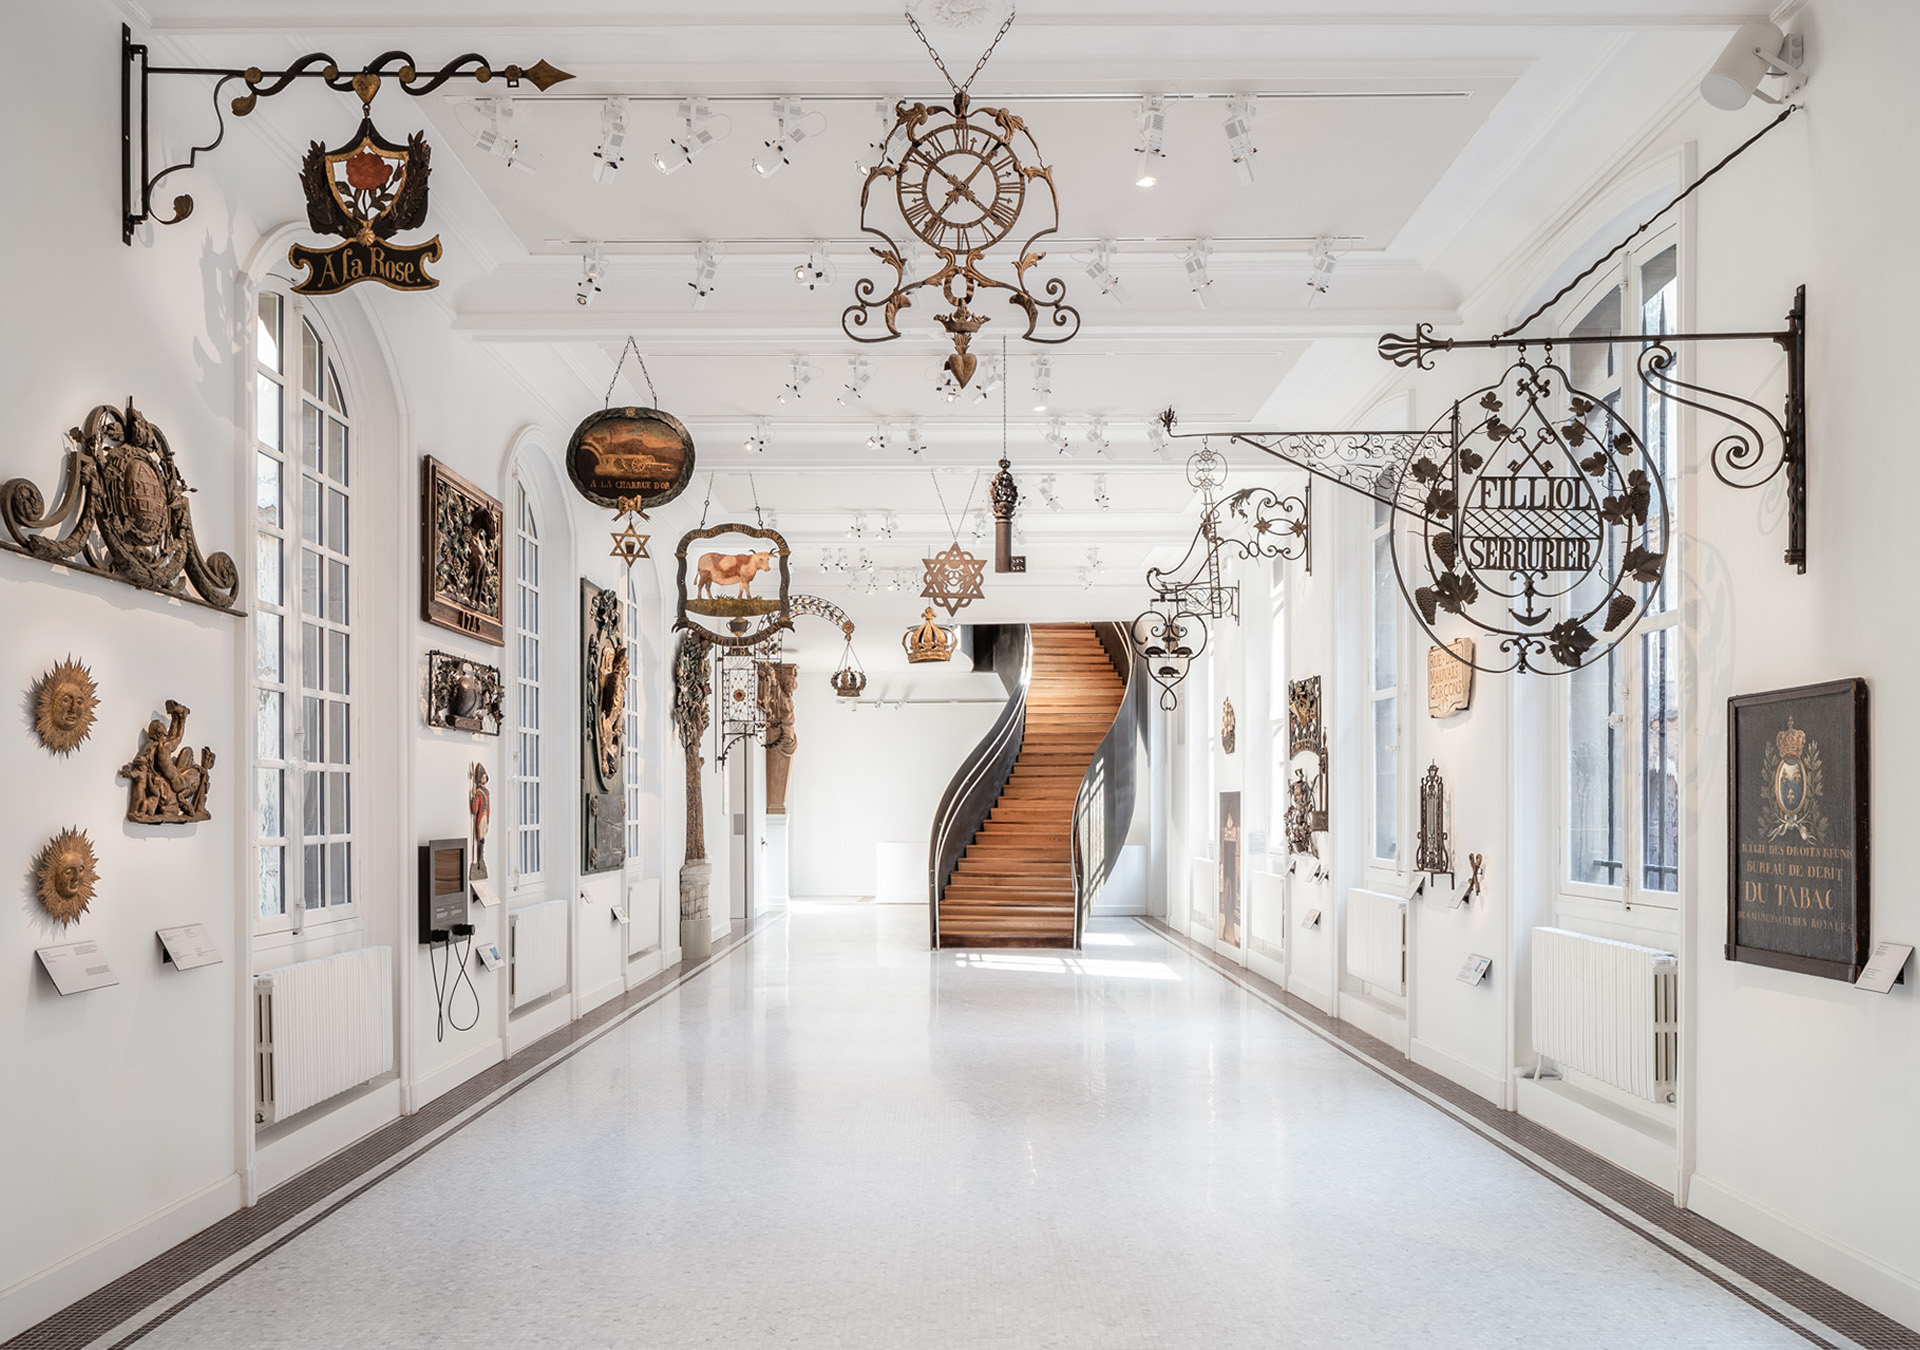 Restoration of the Carnavalet Museum, a memorial site for the history of Paris